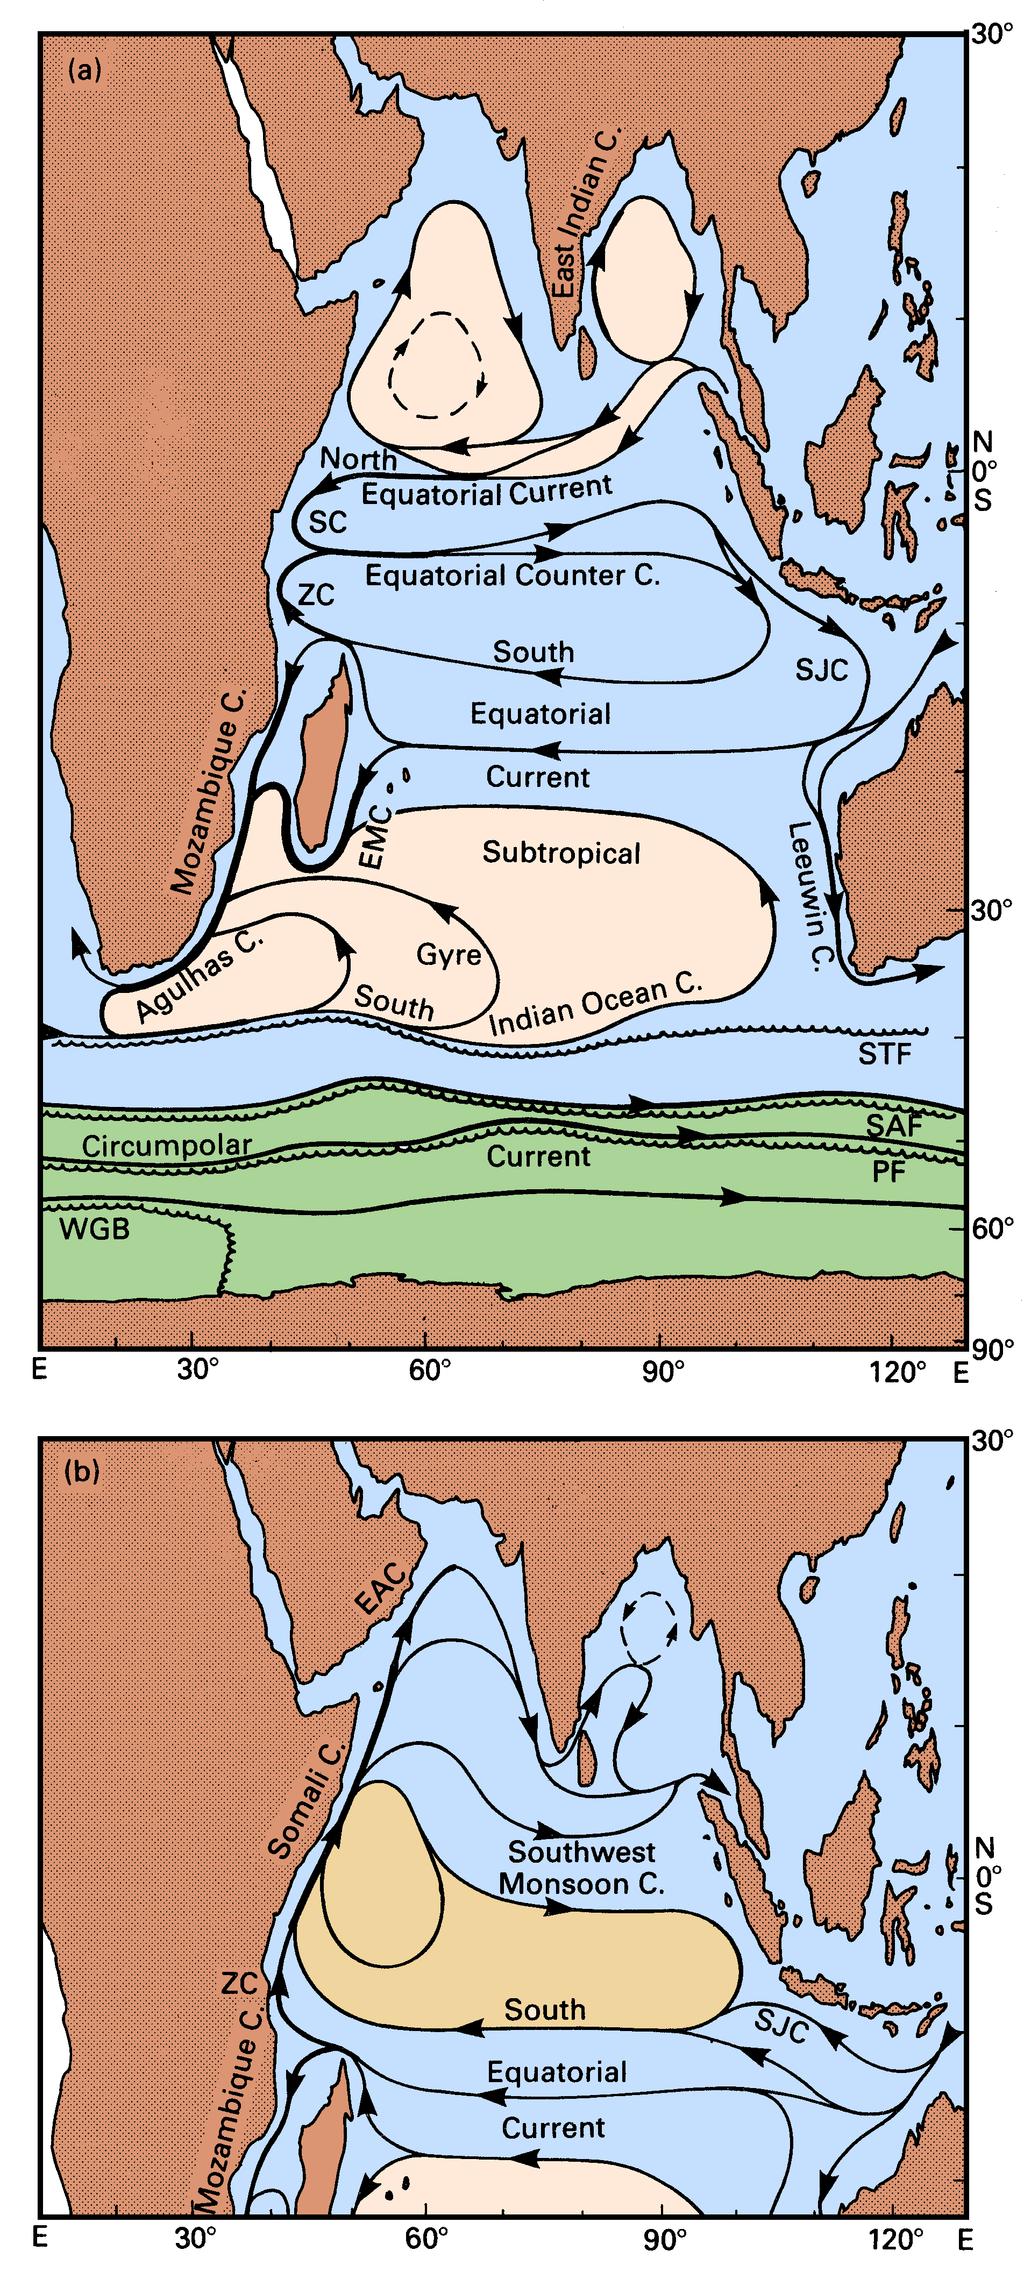 180 Regional Oceanography: an Introduction knowledge, the annual mean transports of the open-ocean currents are well predicted by the Sverdrup relation, and the transports of the East Madagascar,